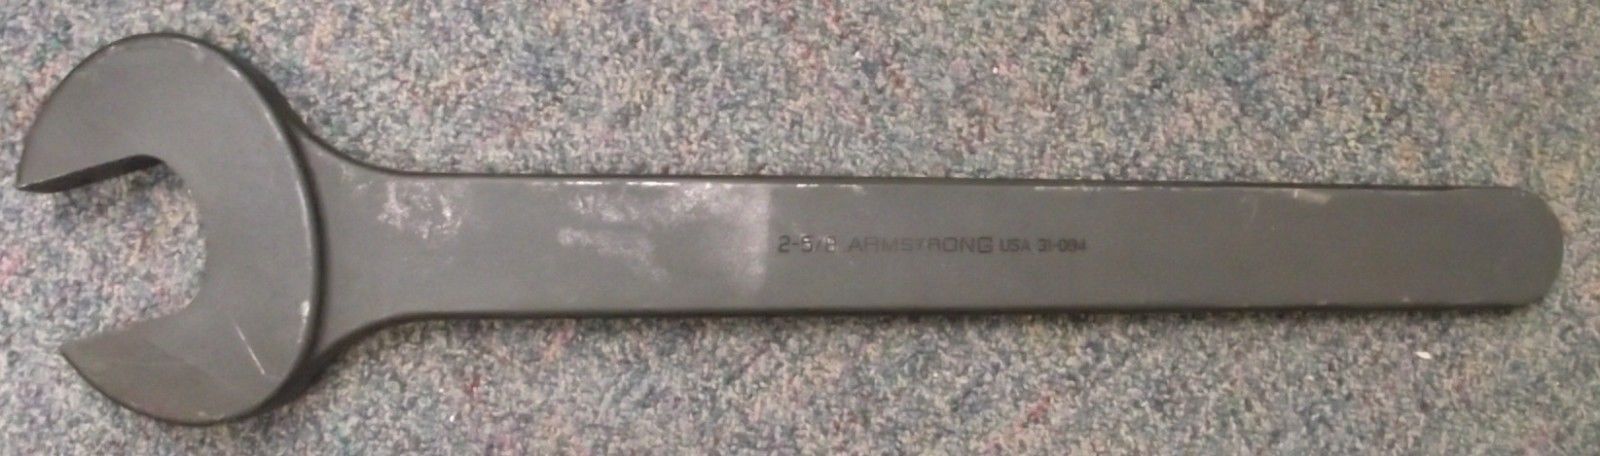 Armstrong 31-084 2-5/8" Carbon Steel Single Head Open End Wrench USA